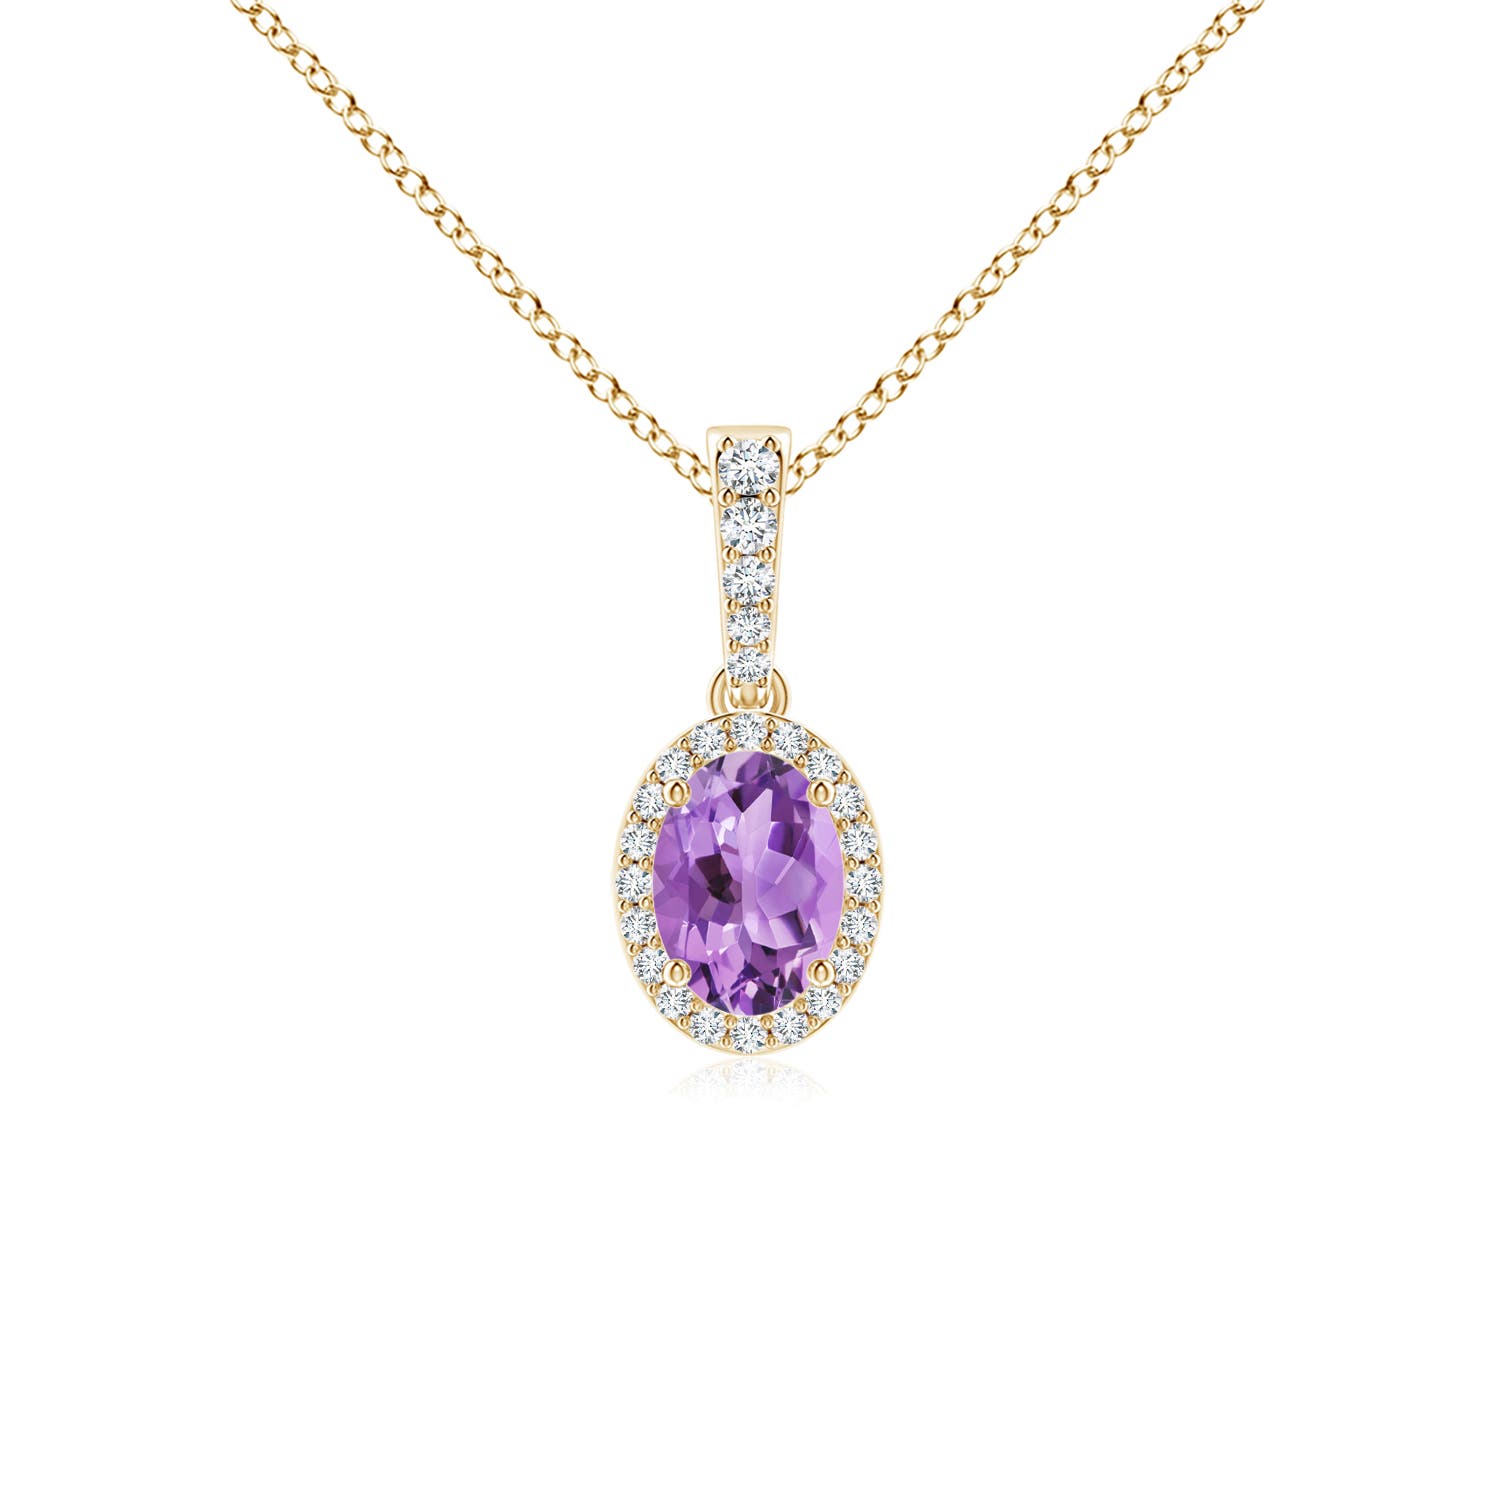 A - Amethyst / 0.84 CT / 14 KT Yellow Gold